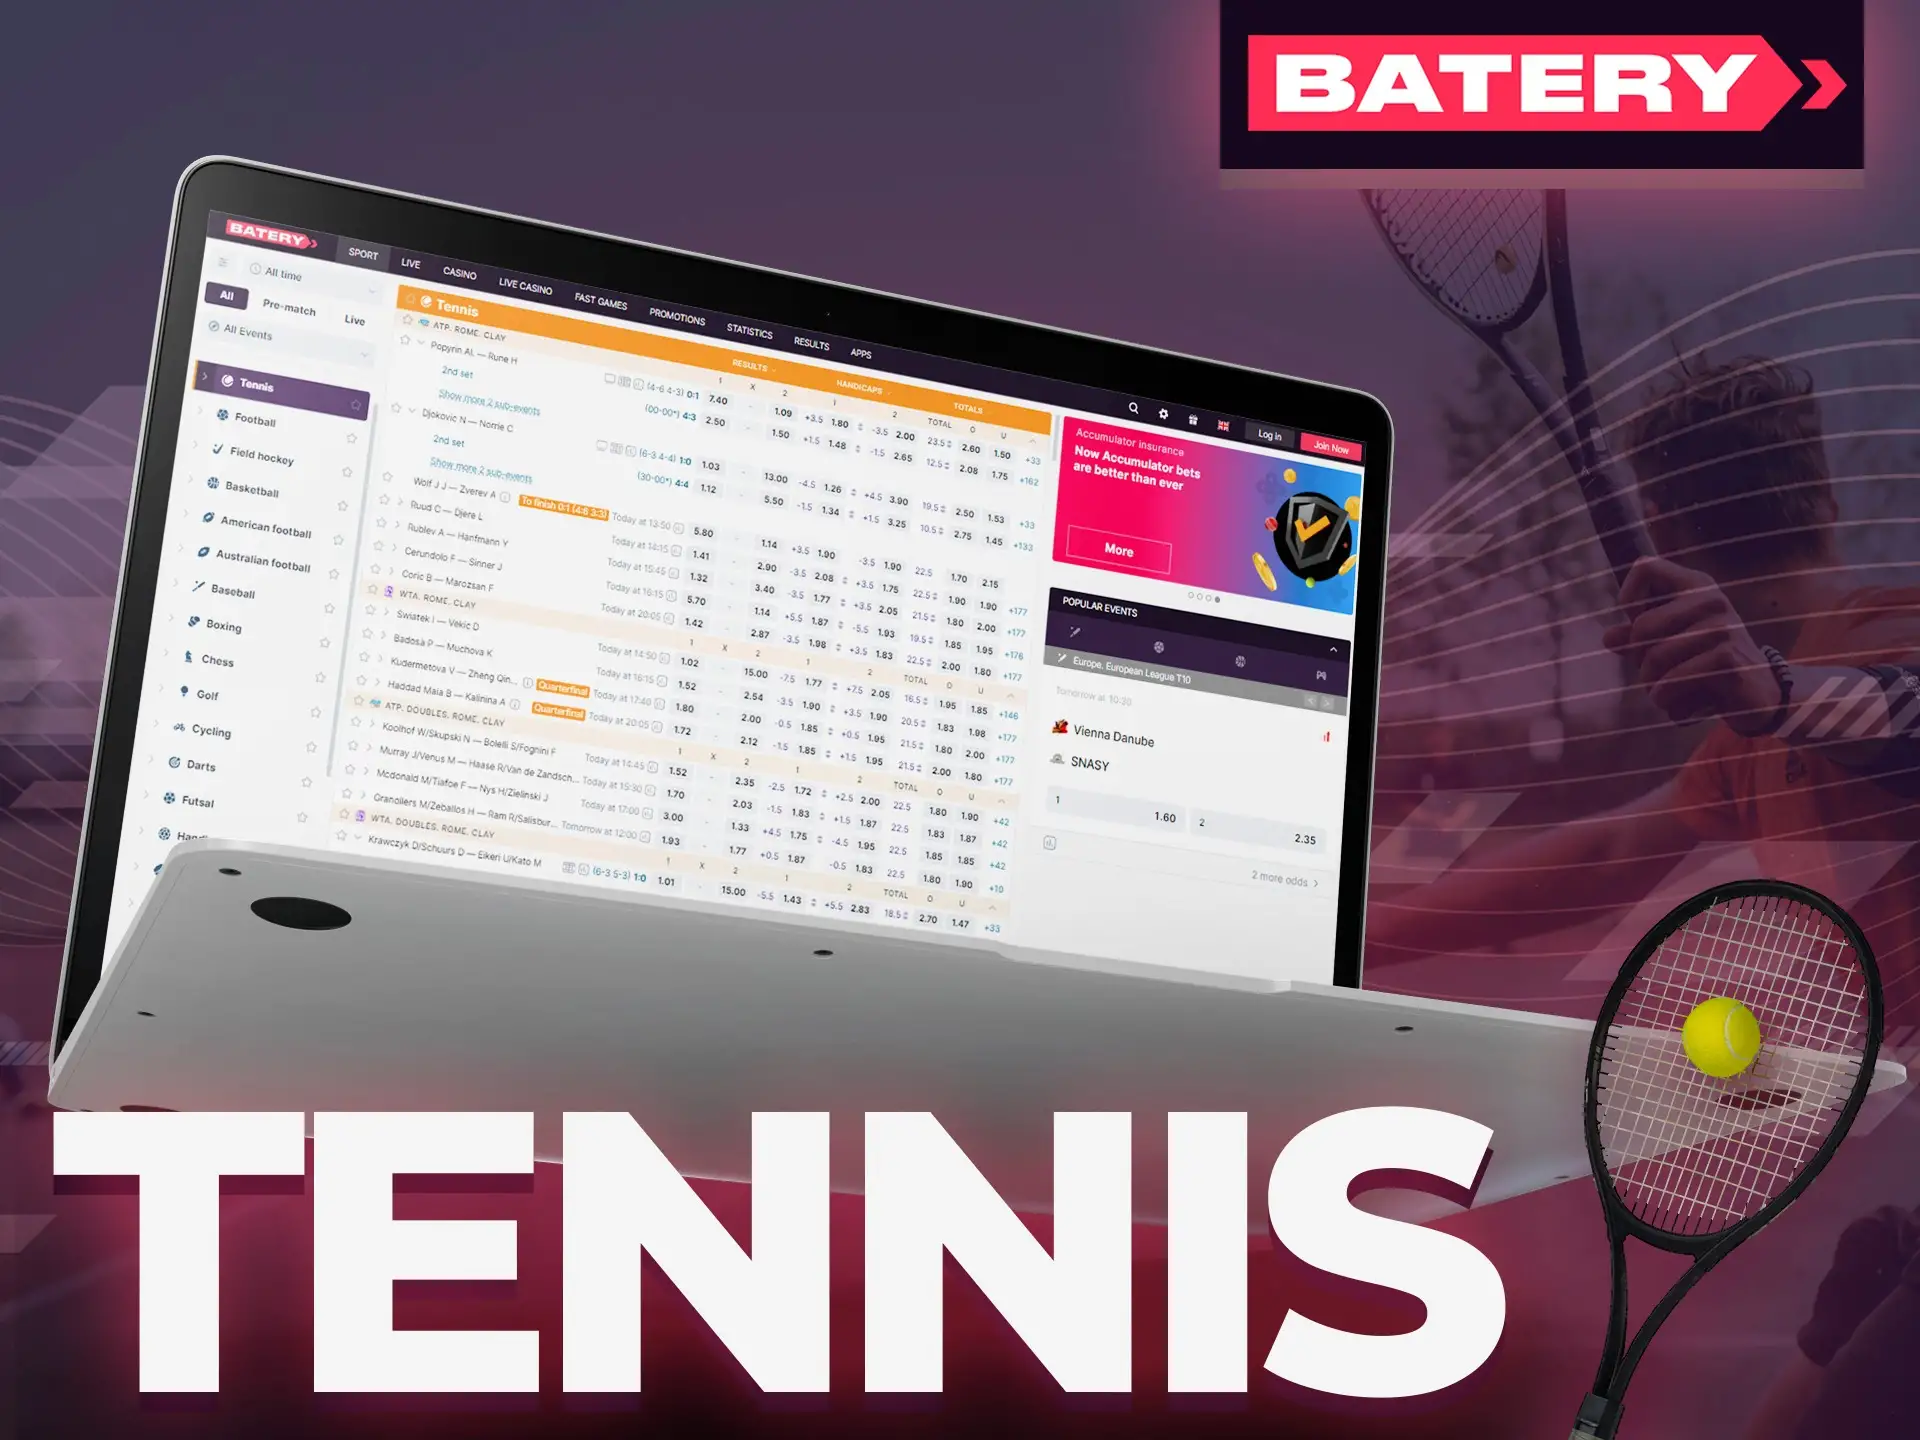 Watch tennis games online at Batery.